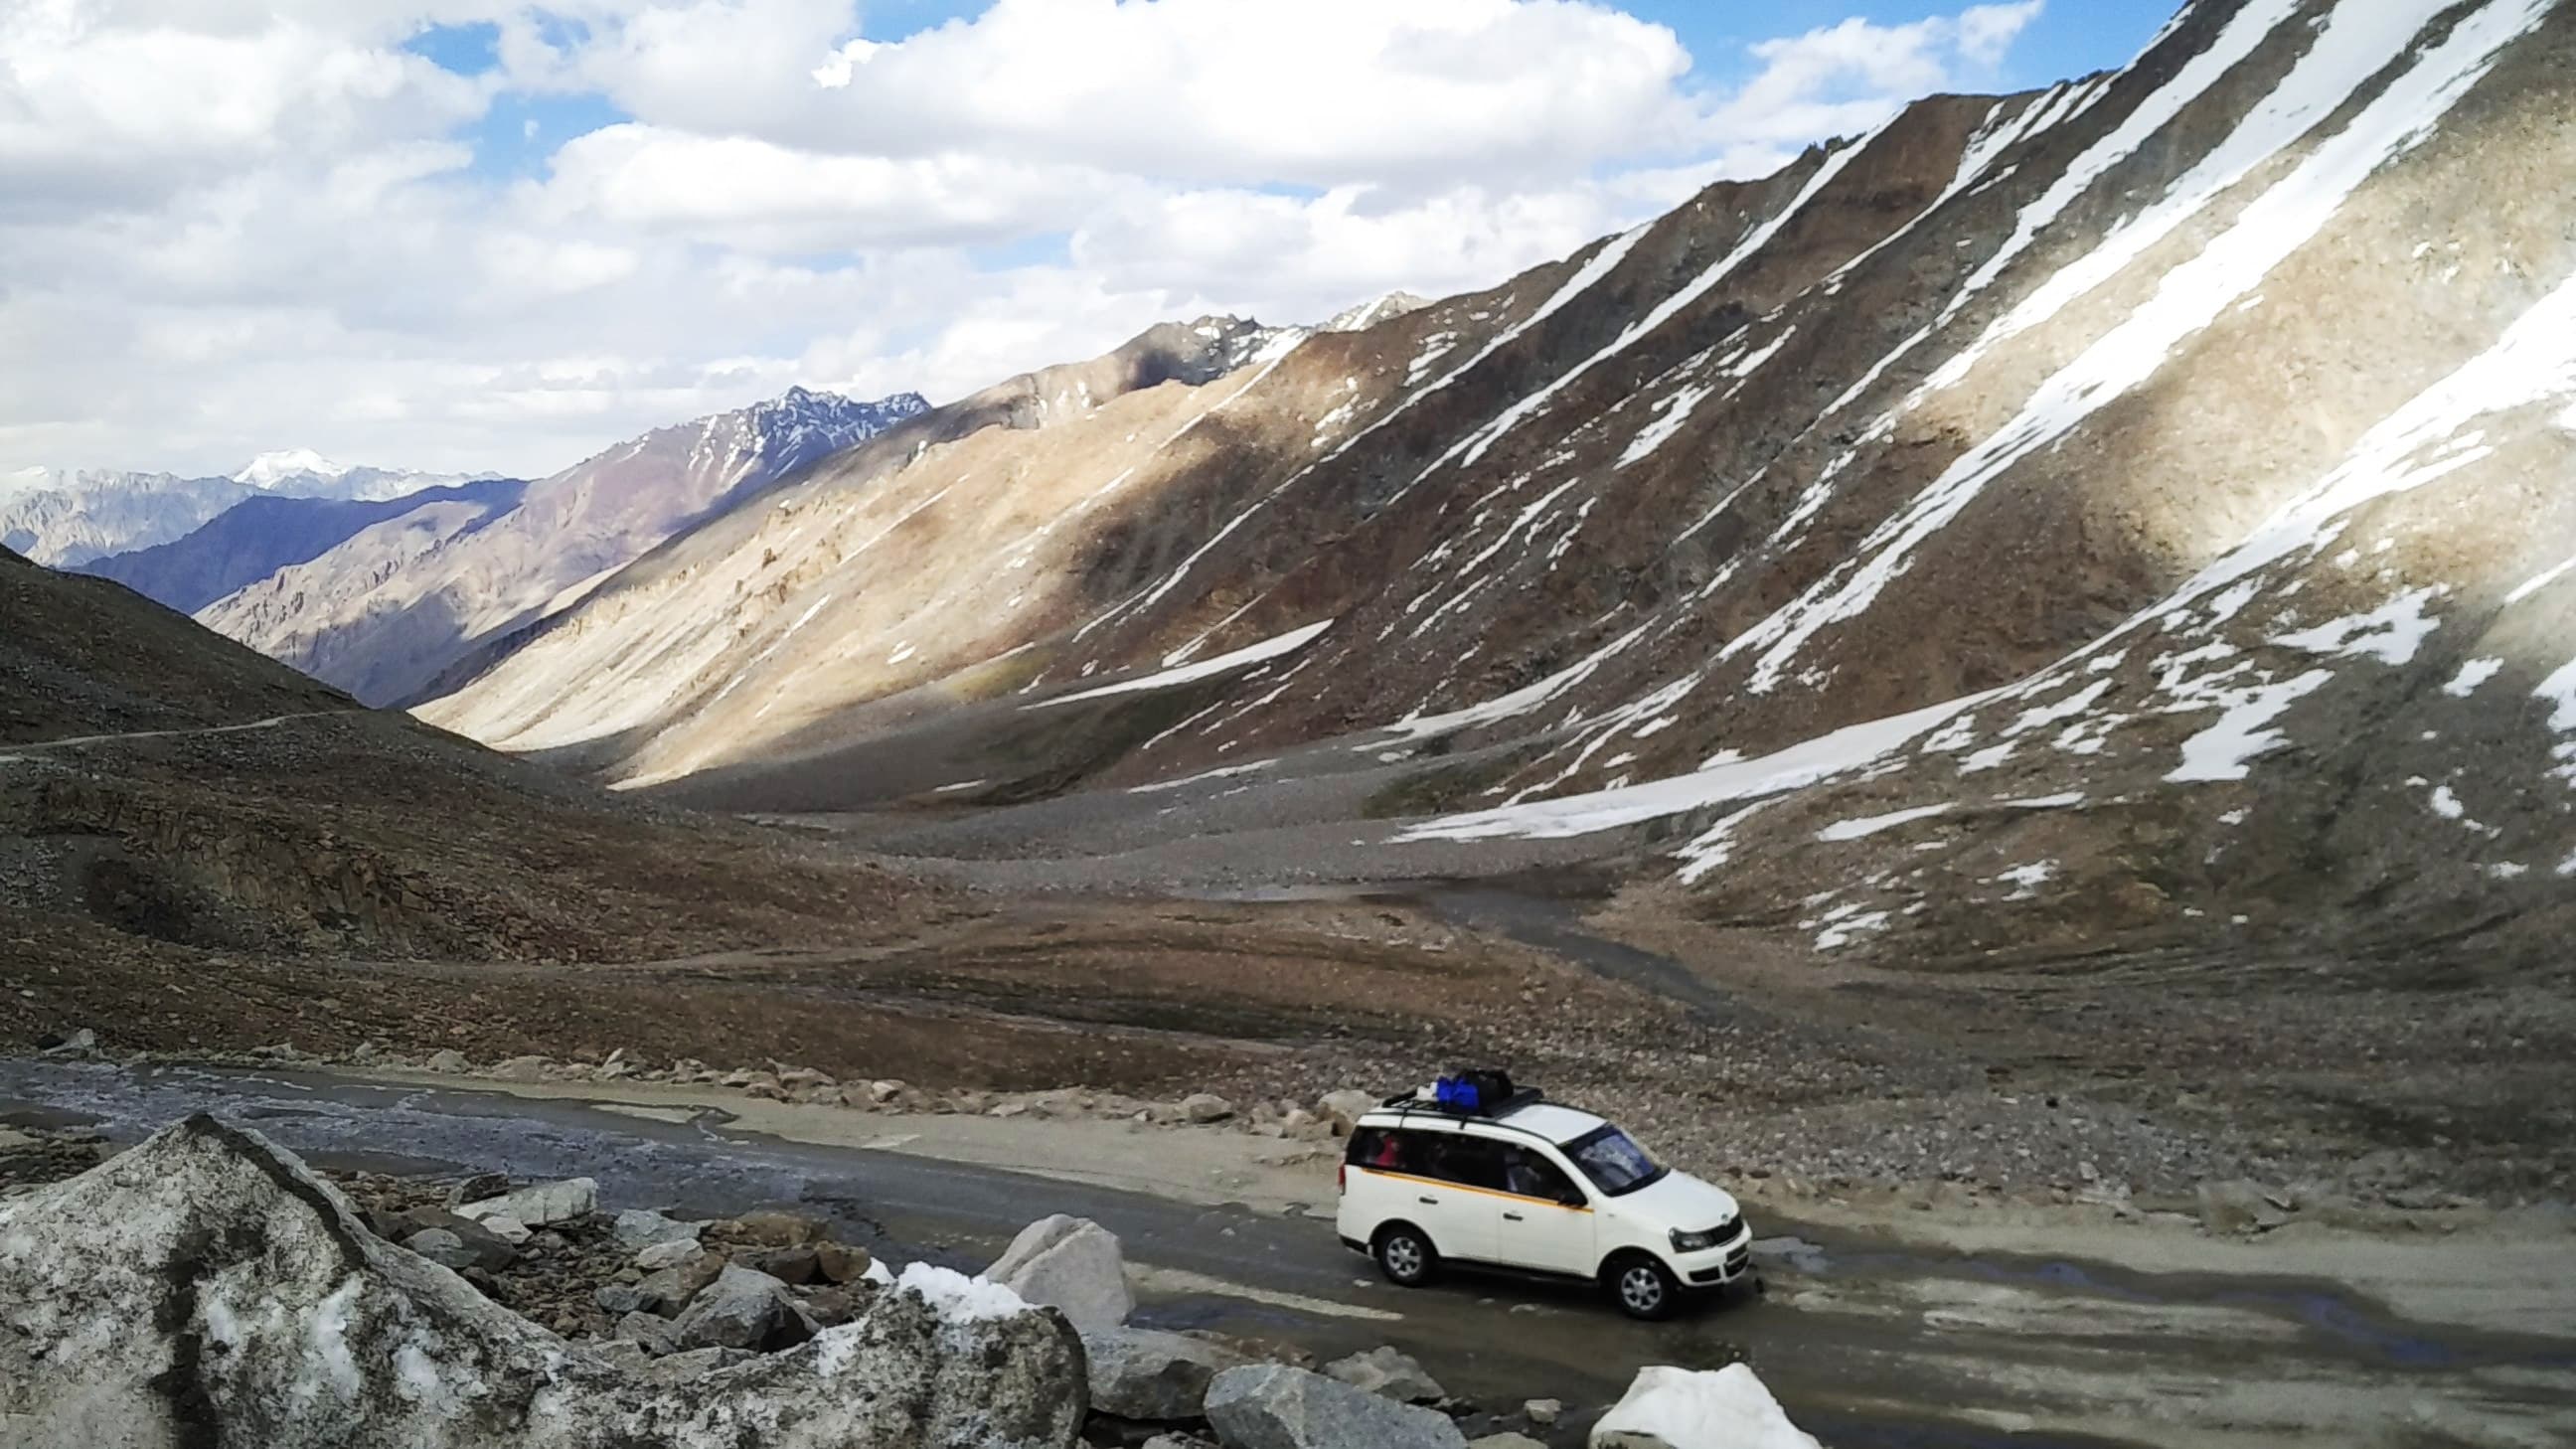 Enroute Rohtang Pass